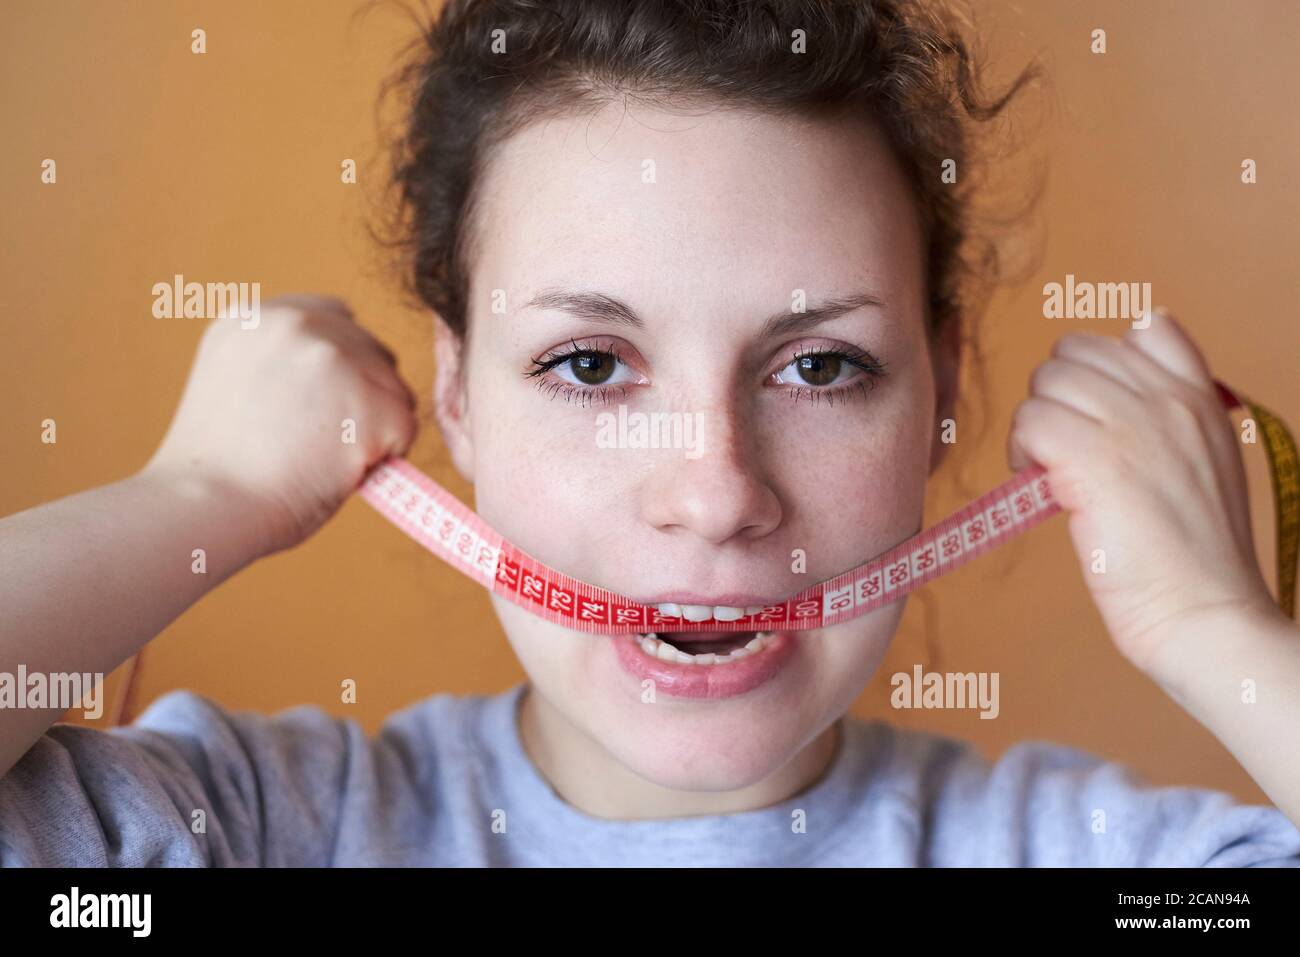 Sad woman with meter in the mouth, topic of losing excess weight, diet and stress. Stock Photo